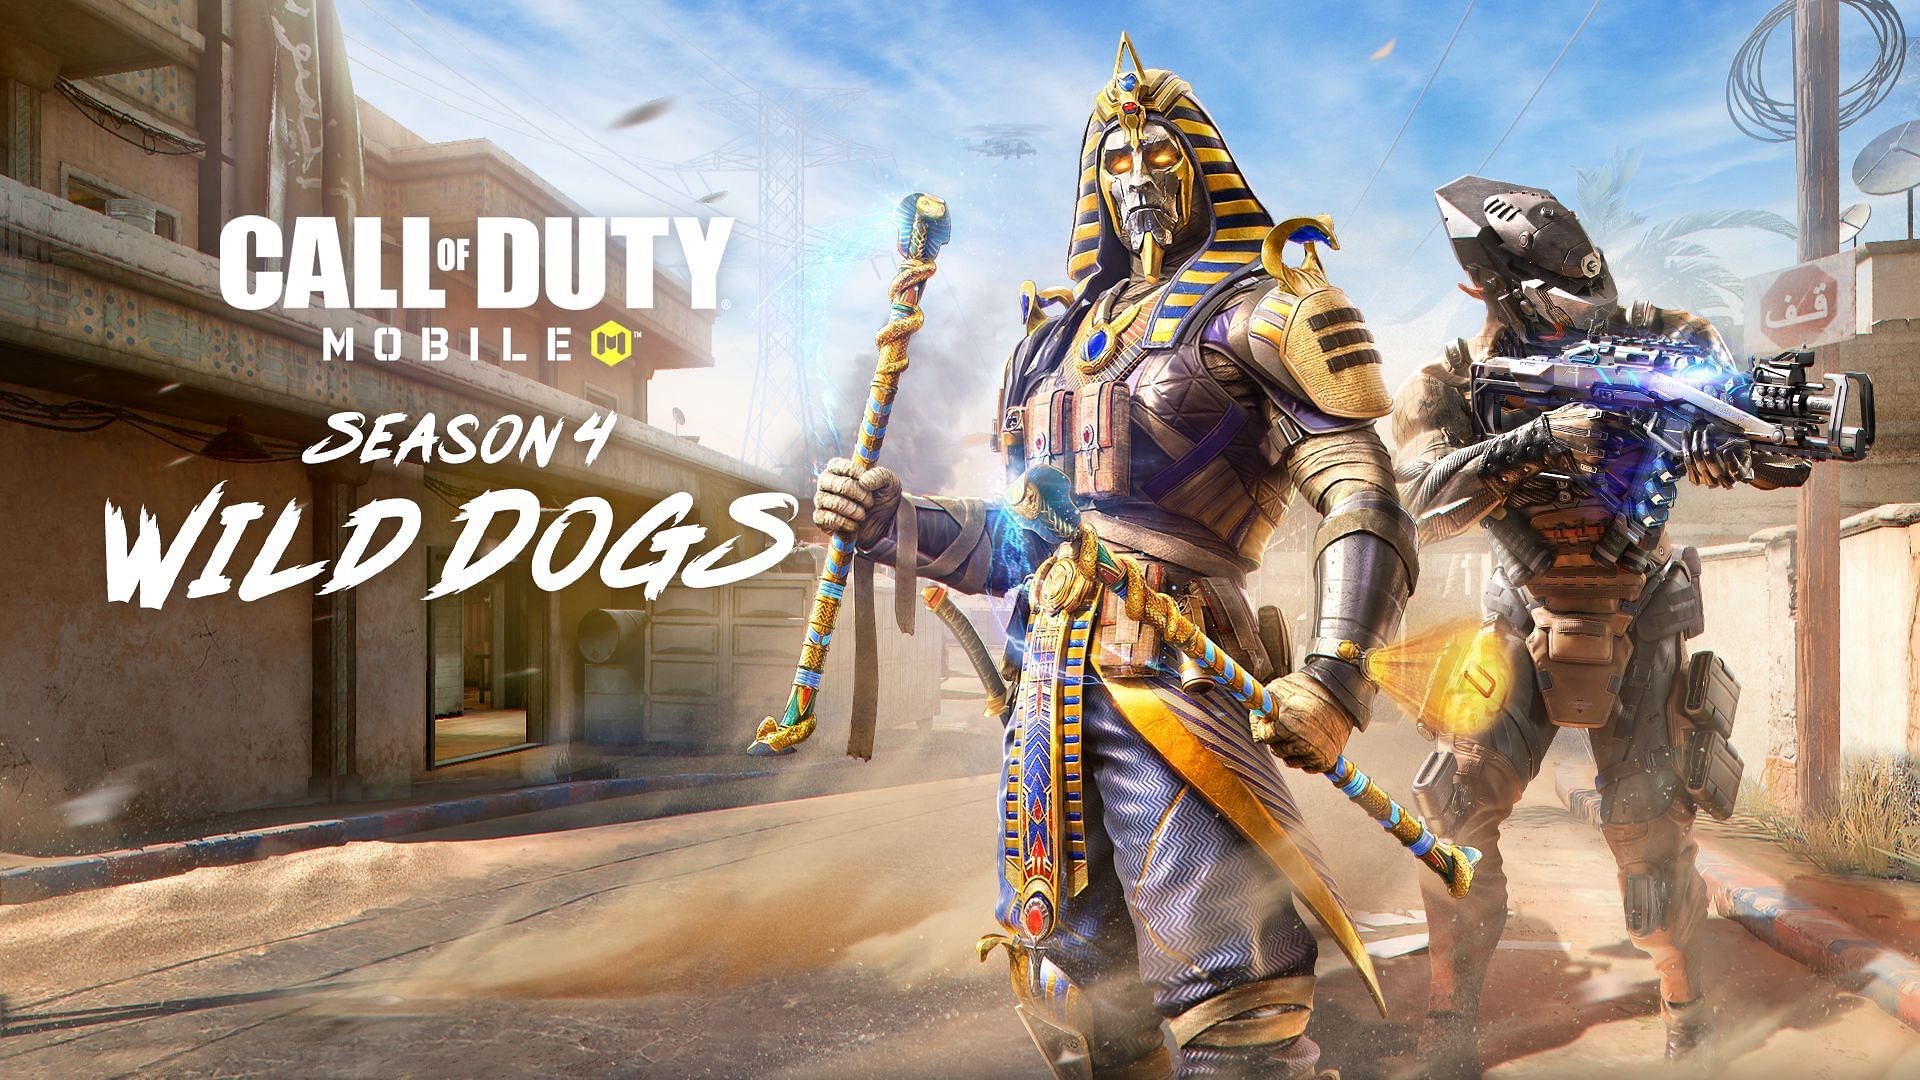 COD Mobile Season 4 will introduce a new legendary character along with a legendary melee weapon for the first time in history (Image via Activision)